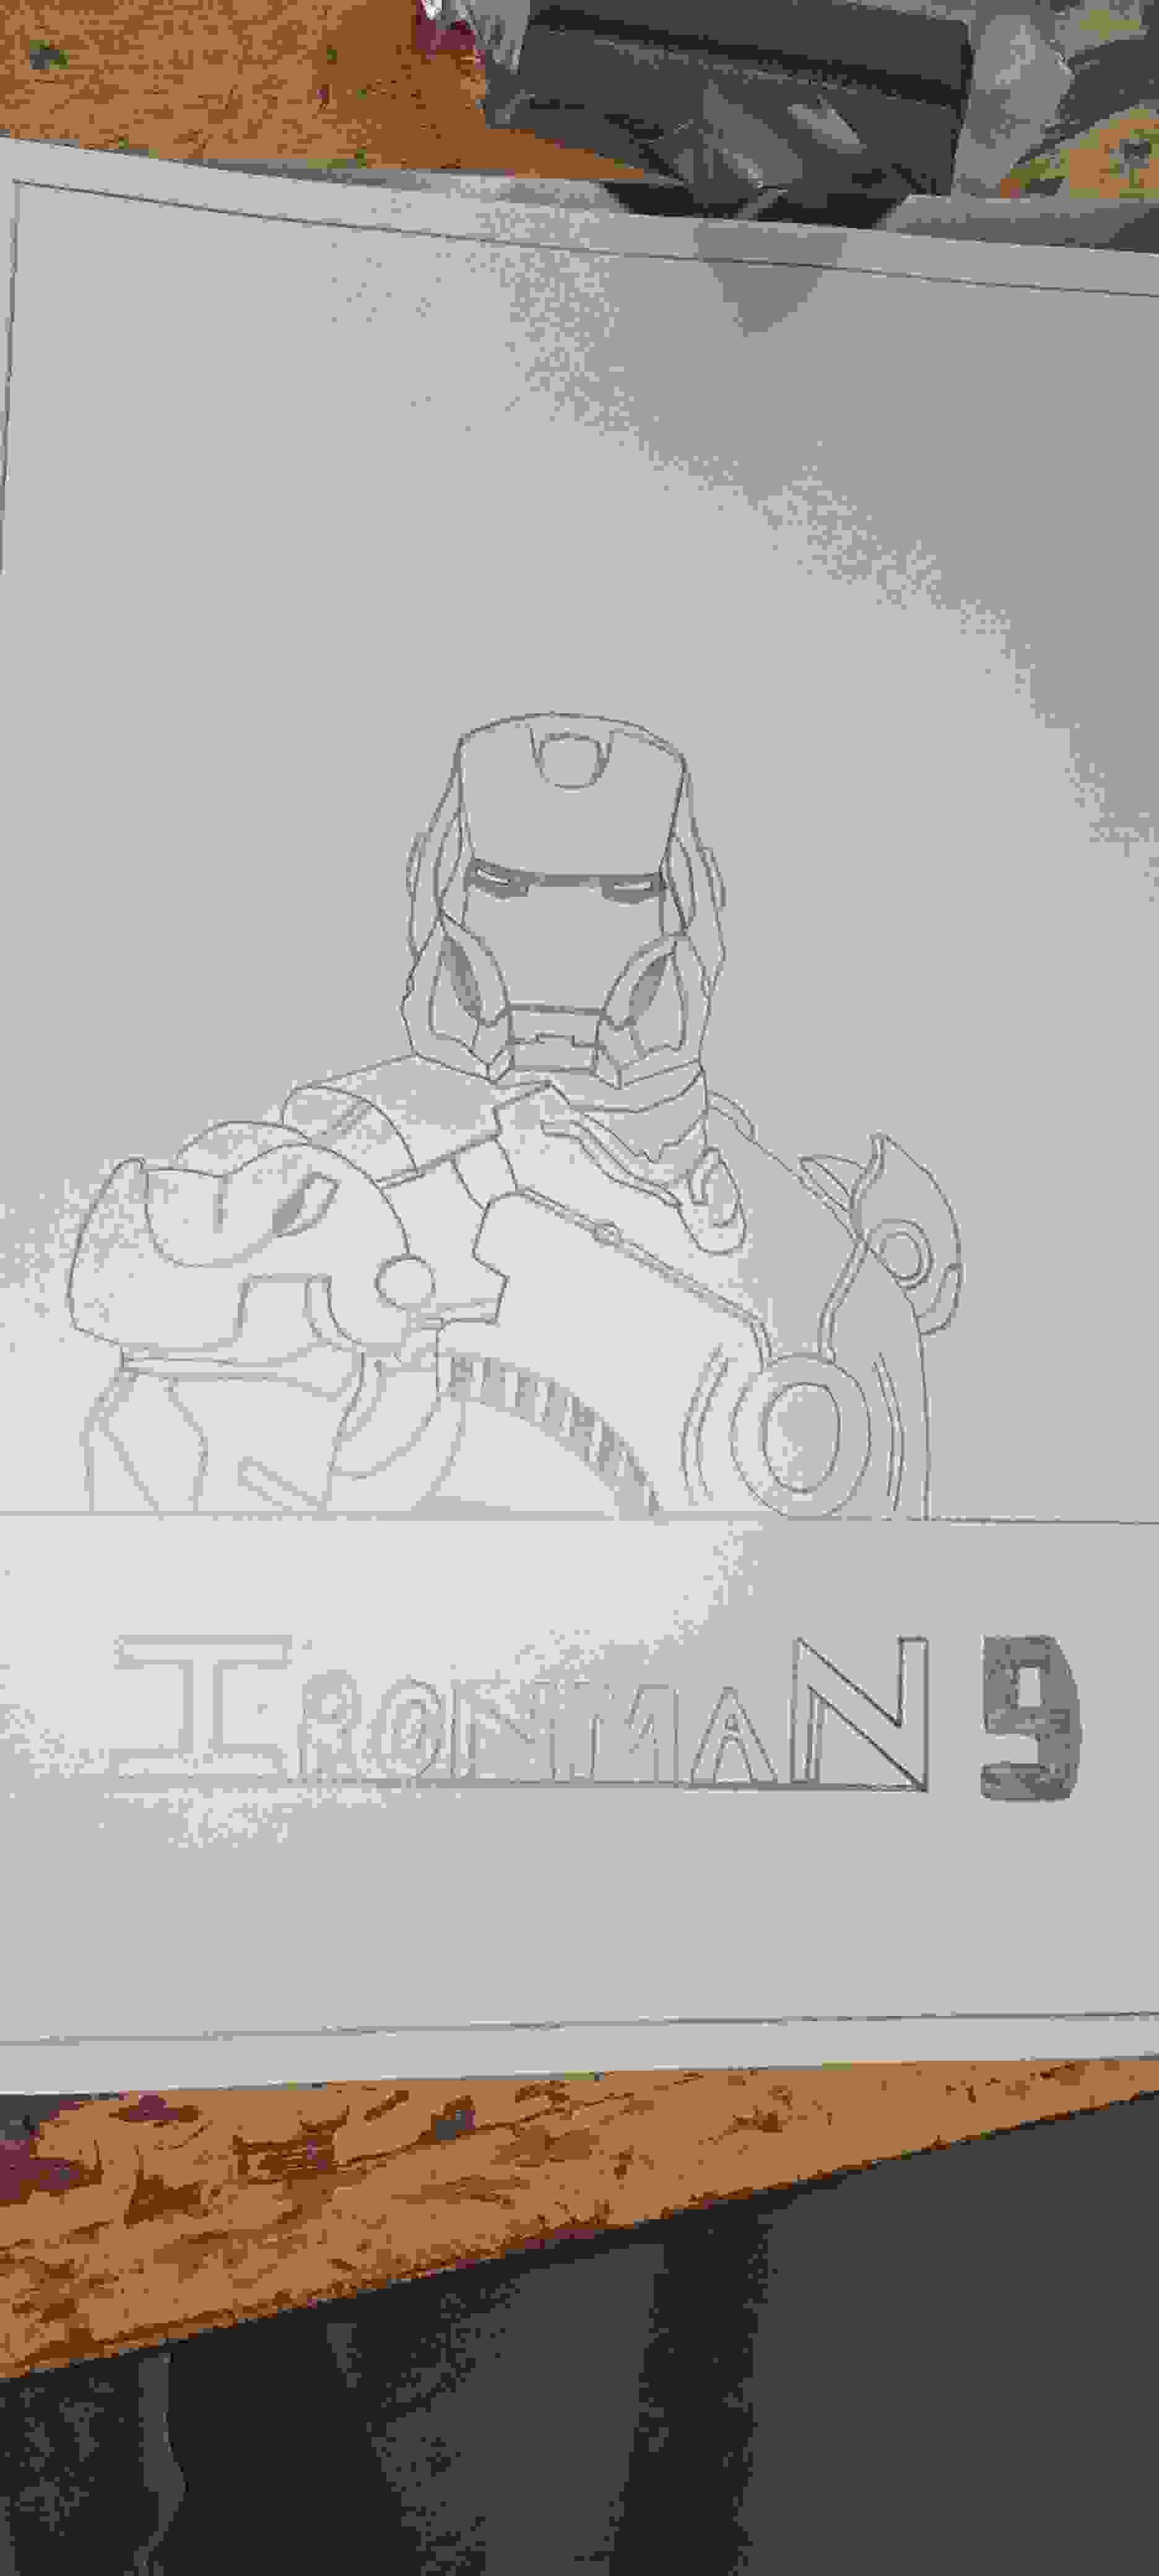 Painting Of Iron Man Mark 25 Pencil Sketch In Pencil Sketch Size 21297